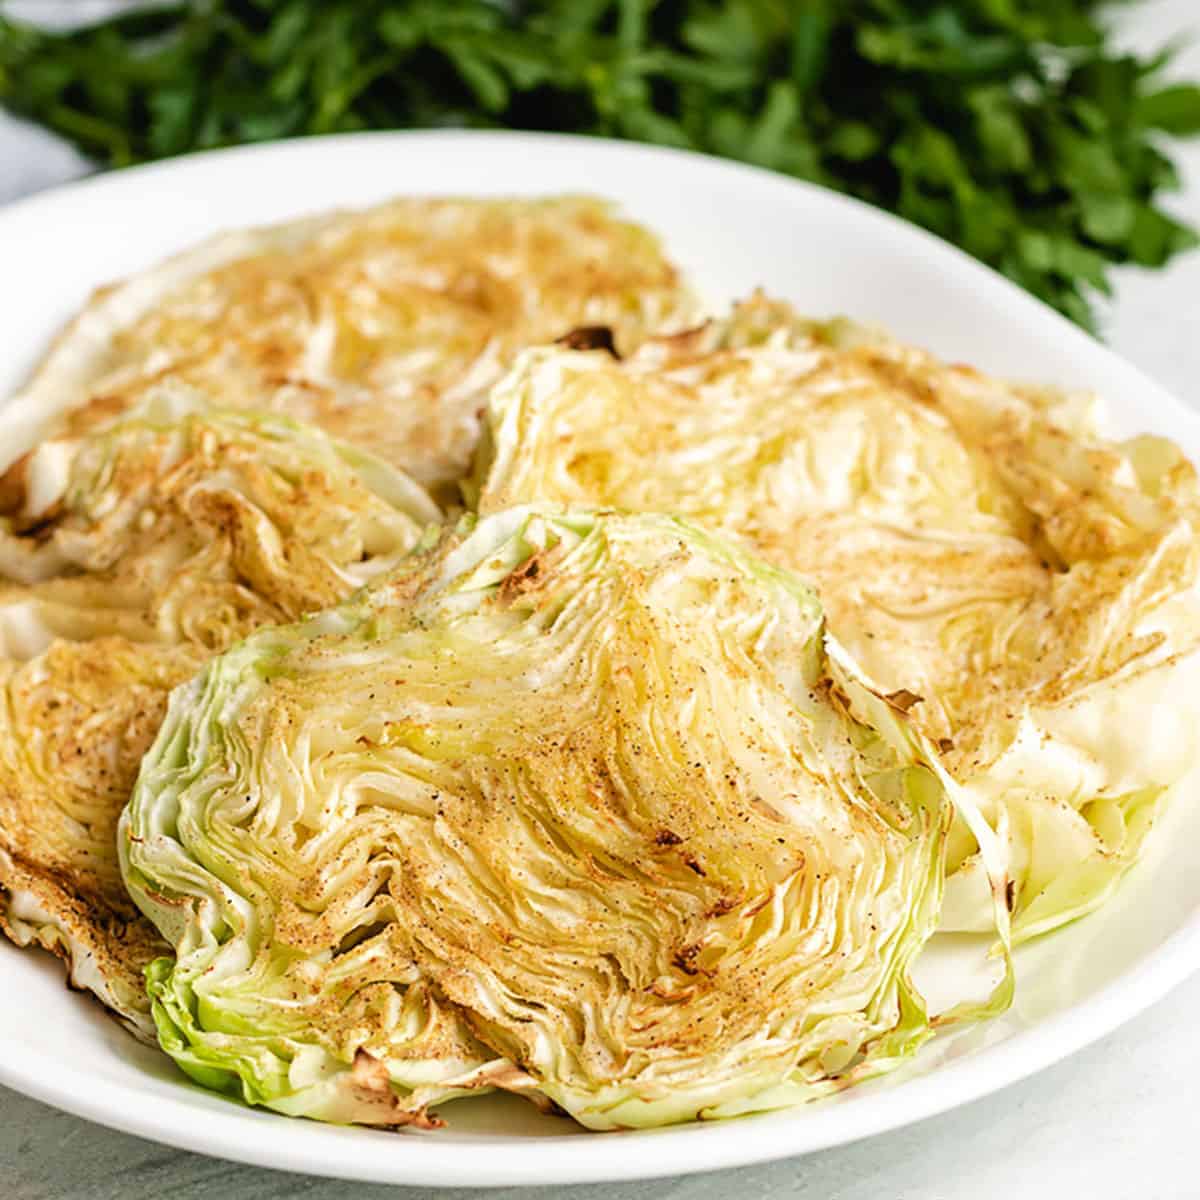 Four seasoned air fryer cabbage steaks on a plate.